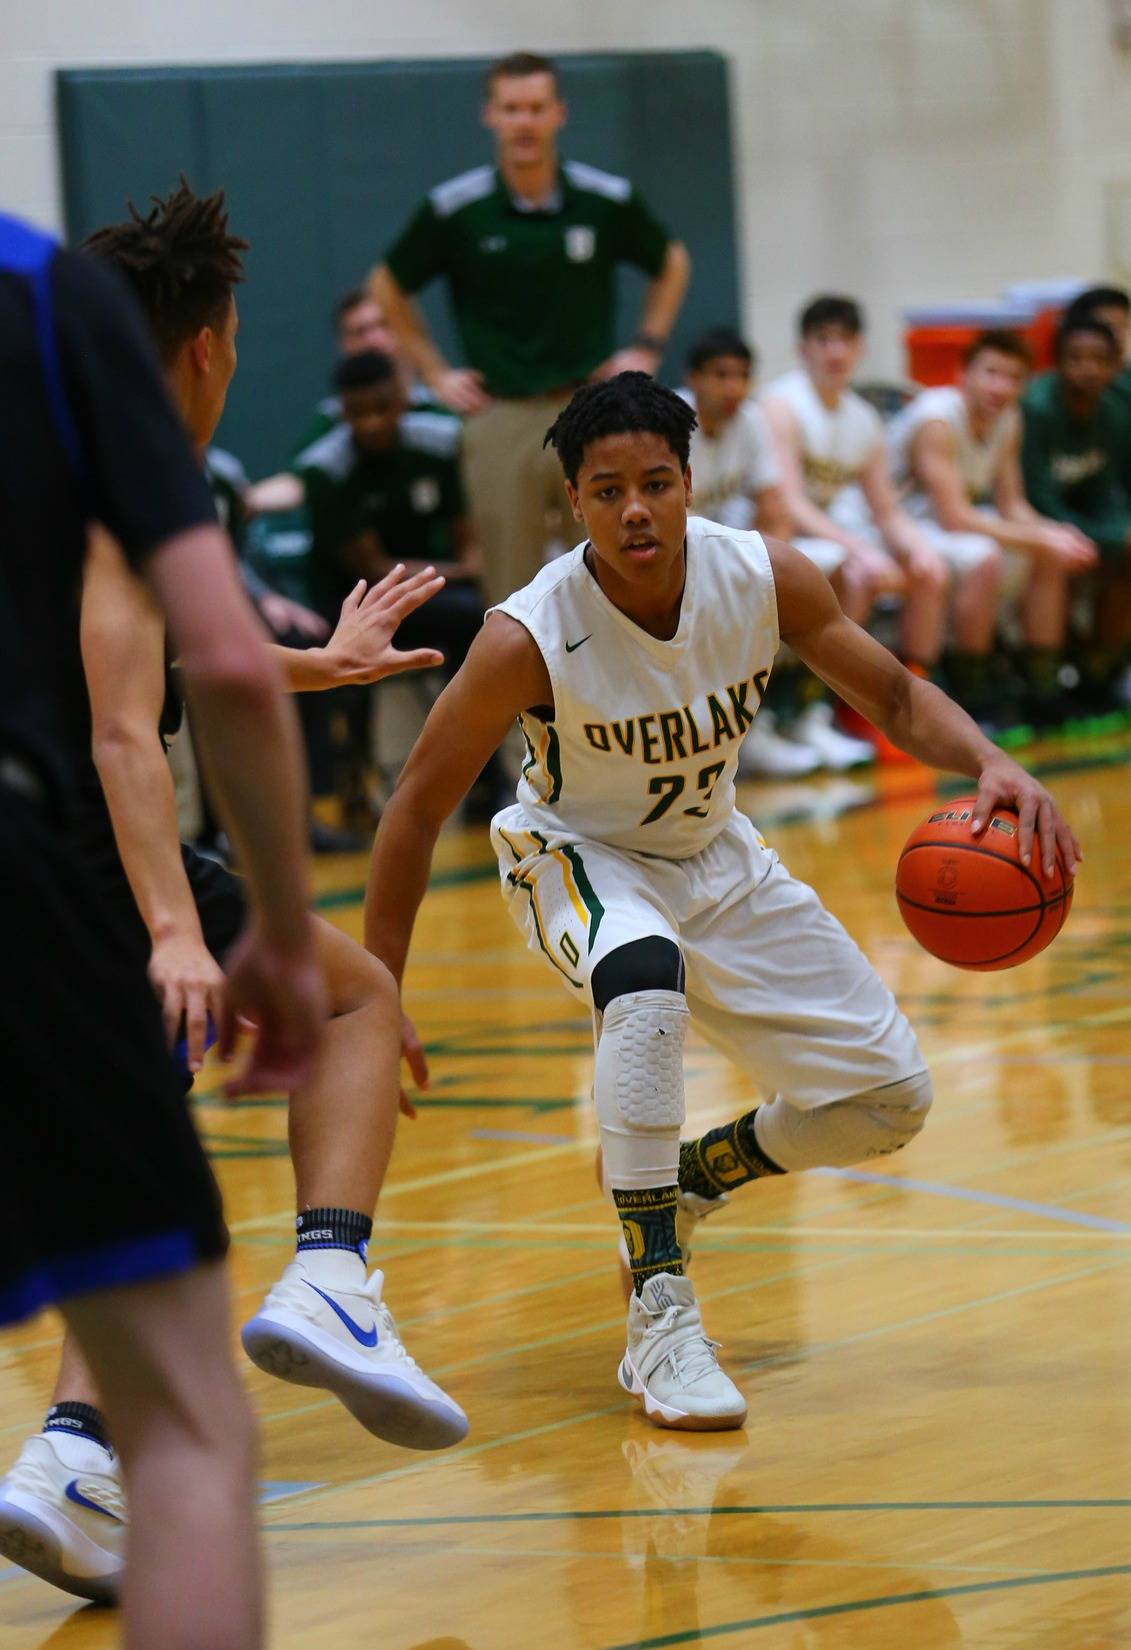 Trey Rudolph gets things rolling for Overlake. Courtesy of Warren Mell